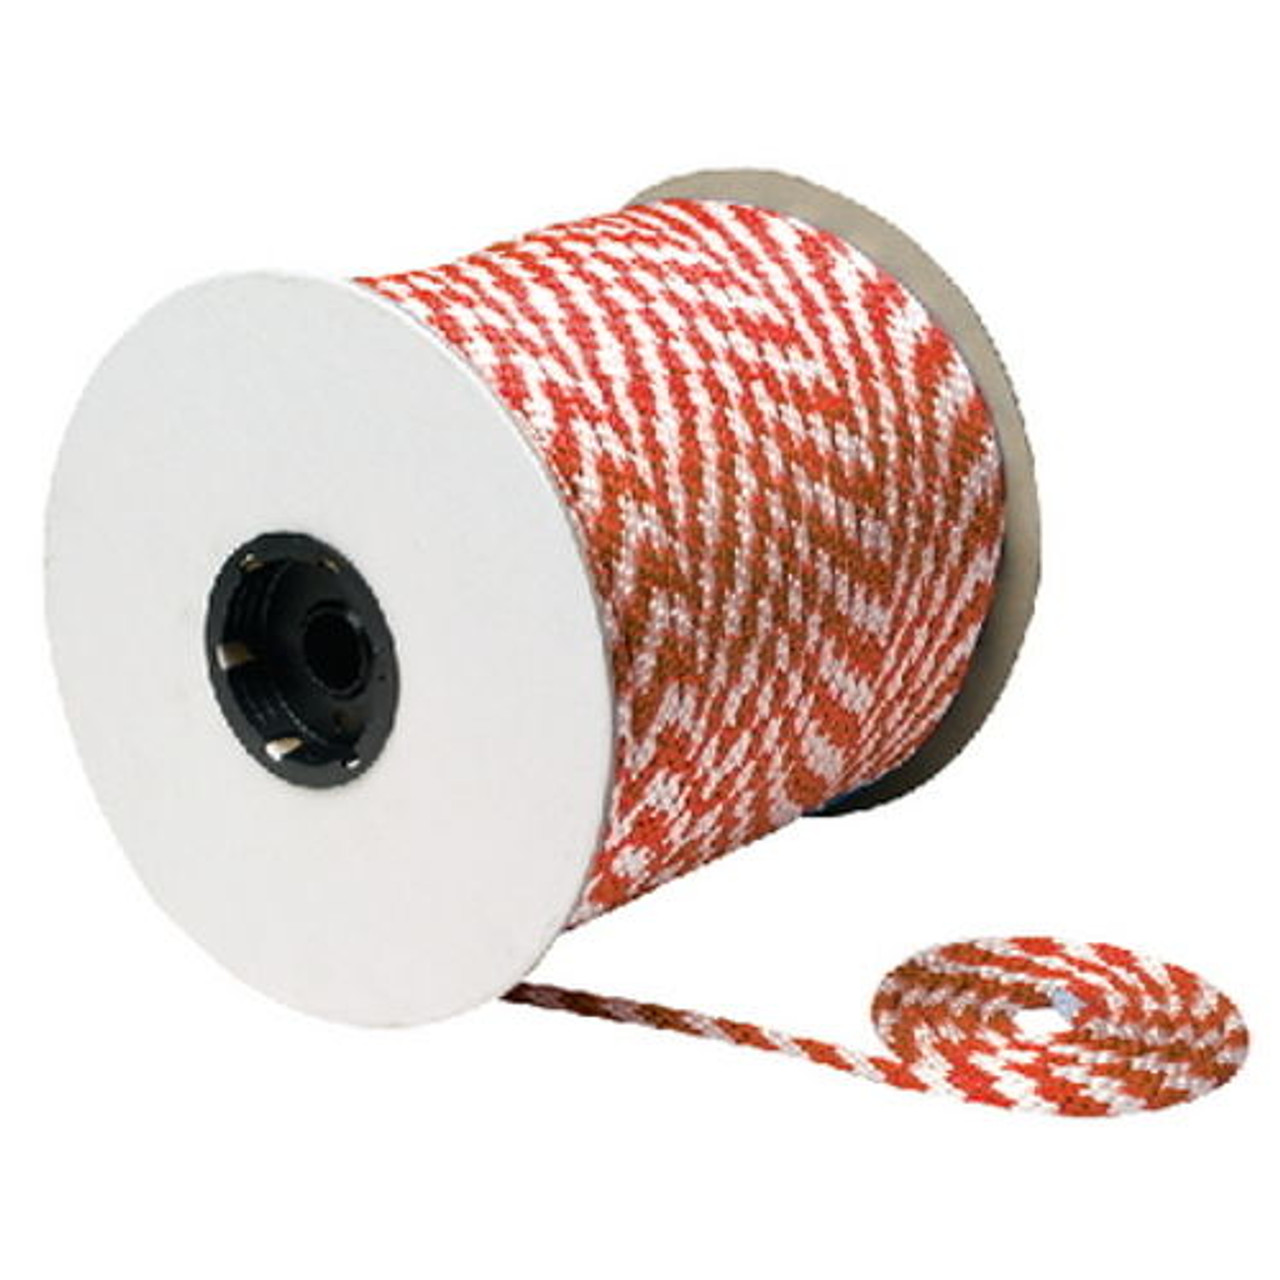 3/8 Inch x 500 Ft White and Red Solid Braid MFP Rope Spool for Boats